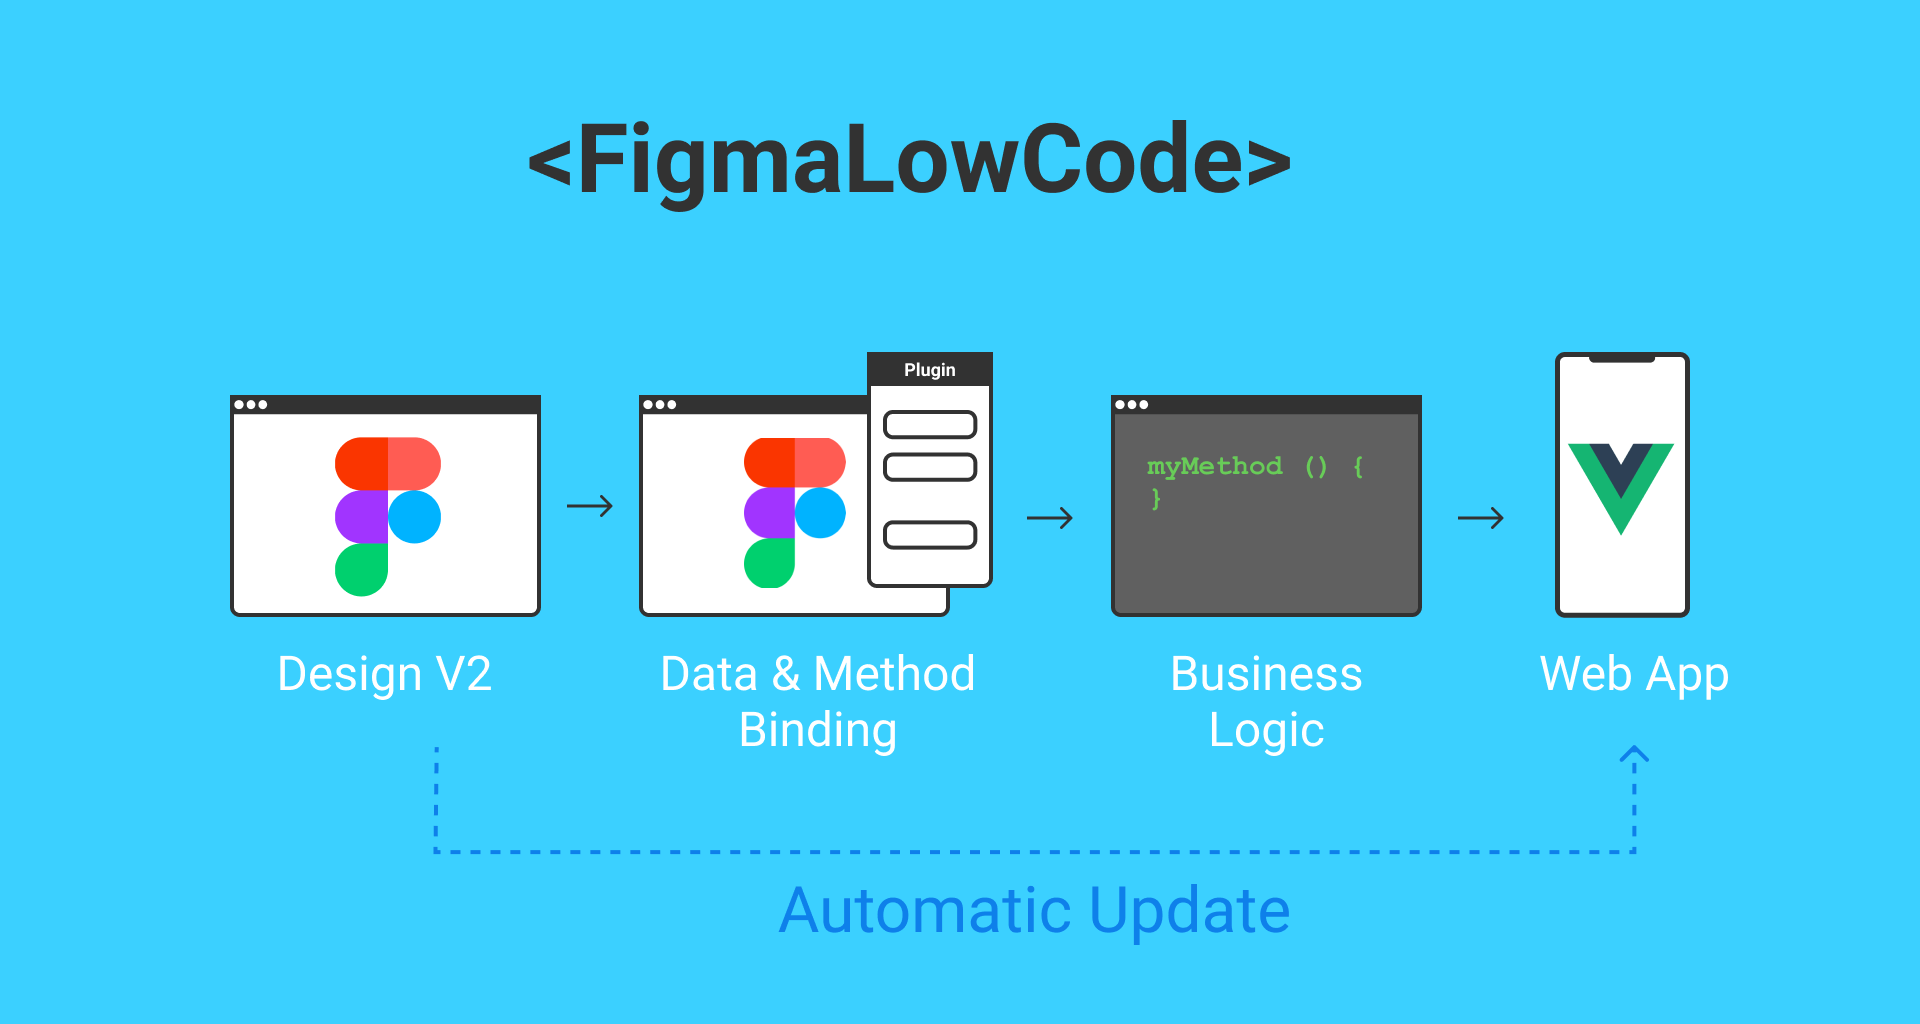 Short introduction into FigmaLowCode